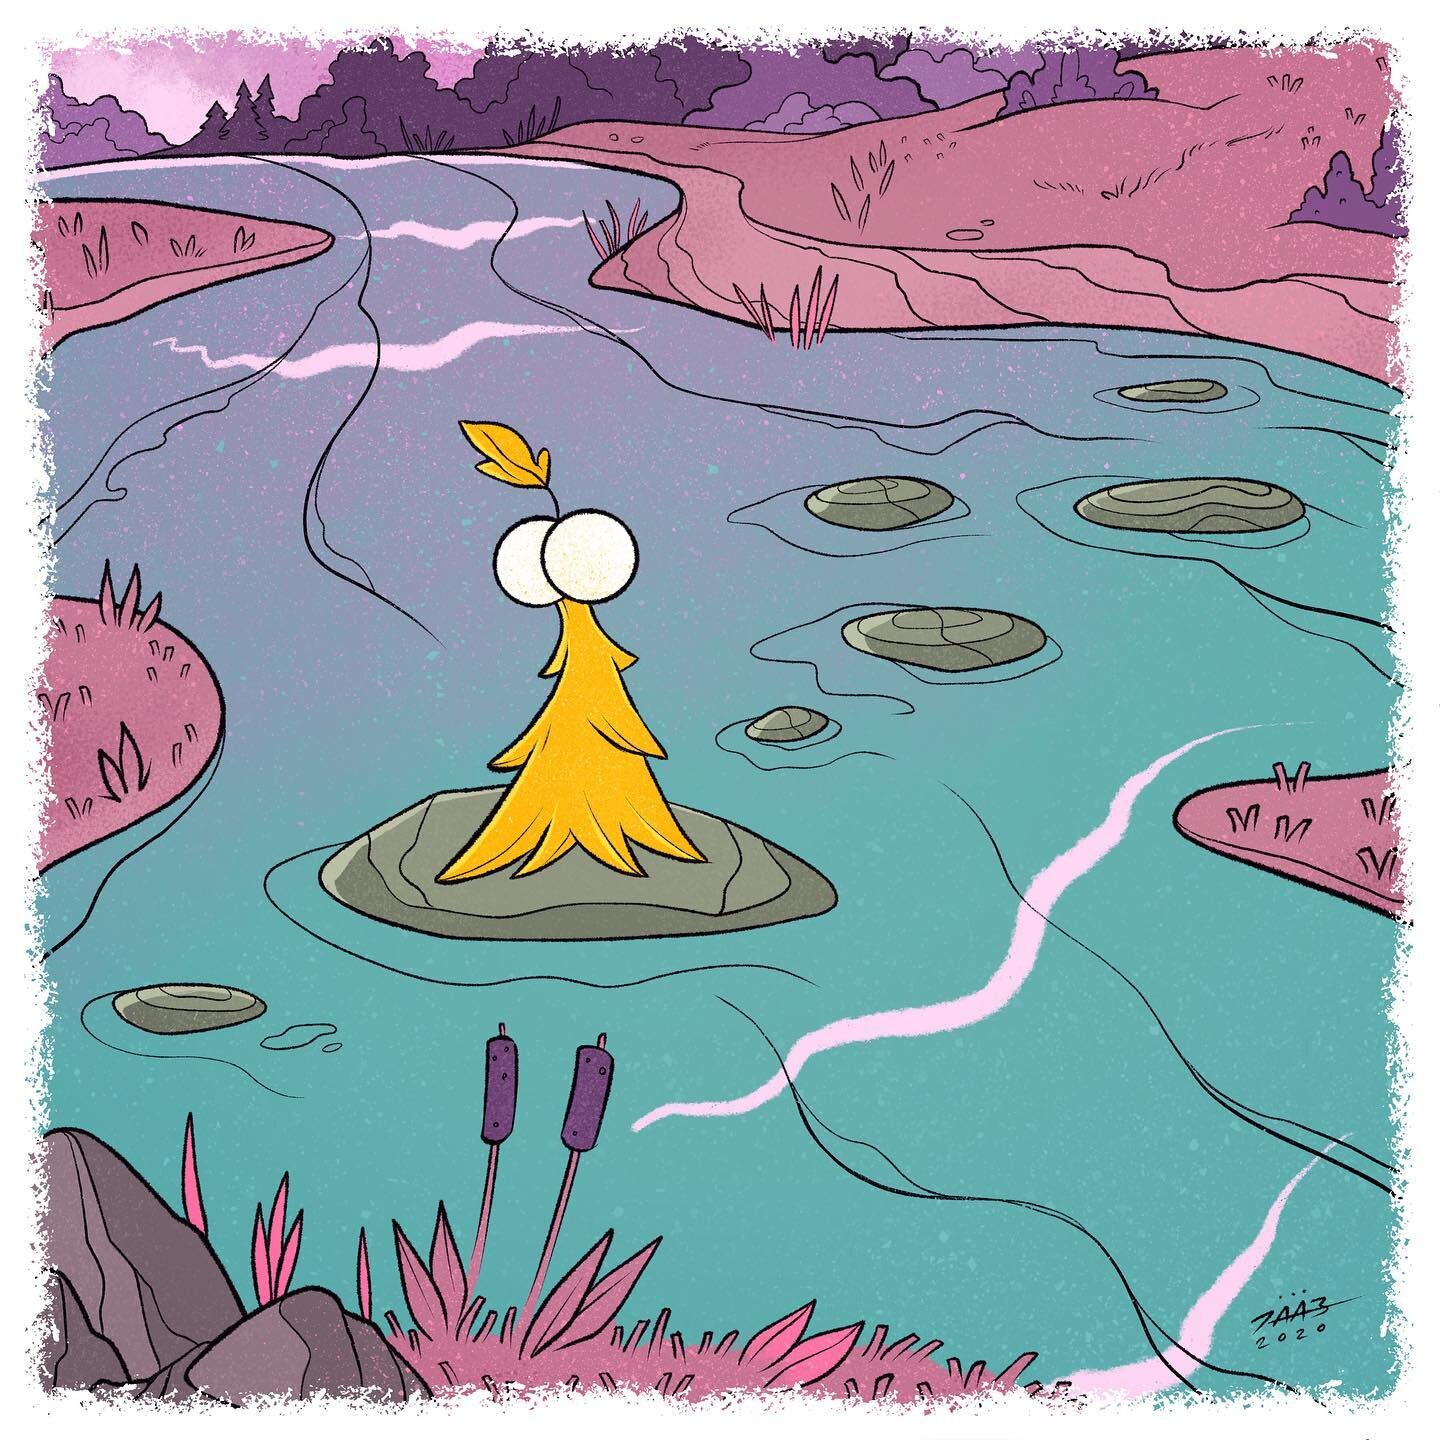 Sometimes your path is only found by leaping from stone to stone. Rocks in a river. Water rushing on every side. Take courage, have faith, and remember to be patient with yourself.  #iempathizewithmartin #lukedaab #webcomic #webcomics #onlinecomics #